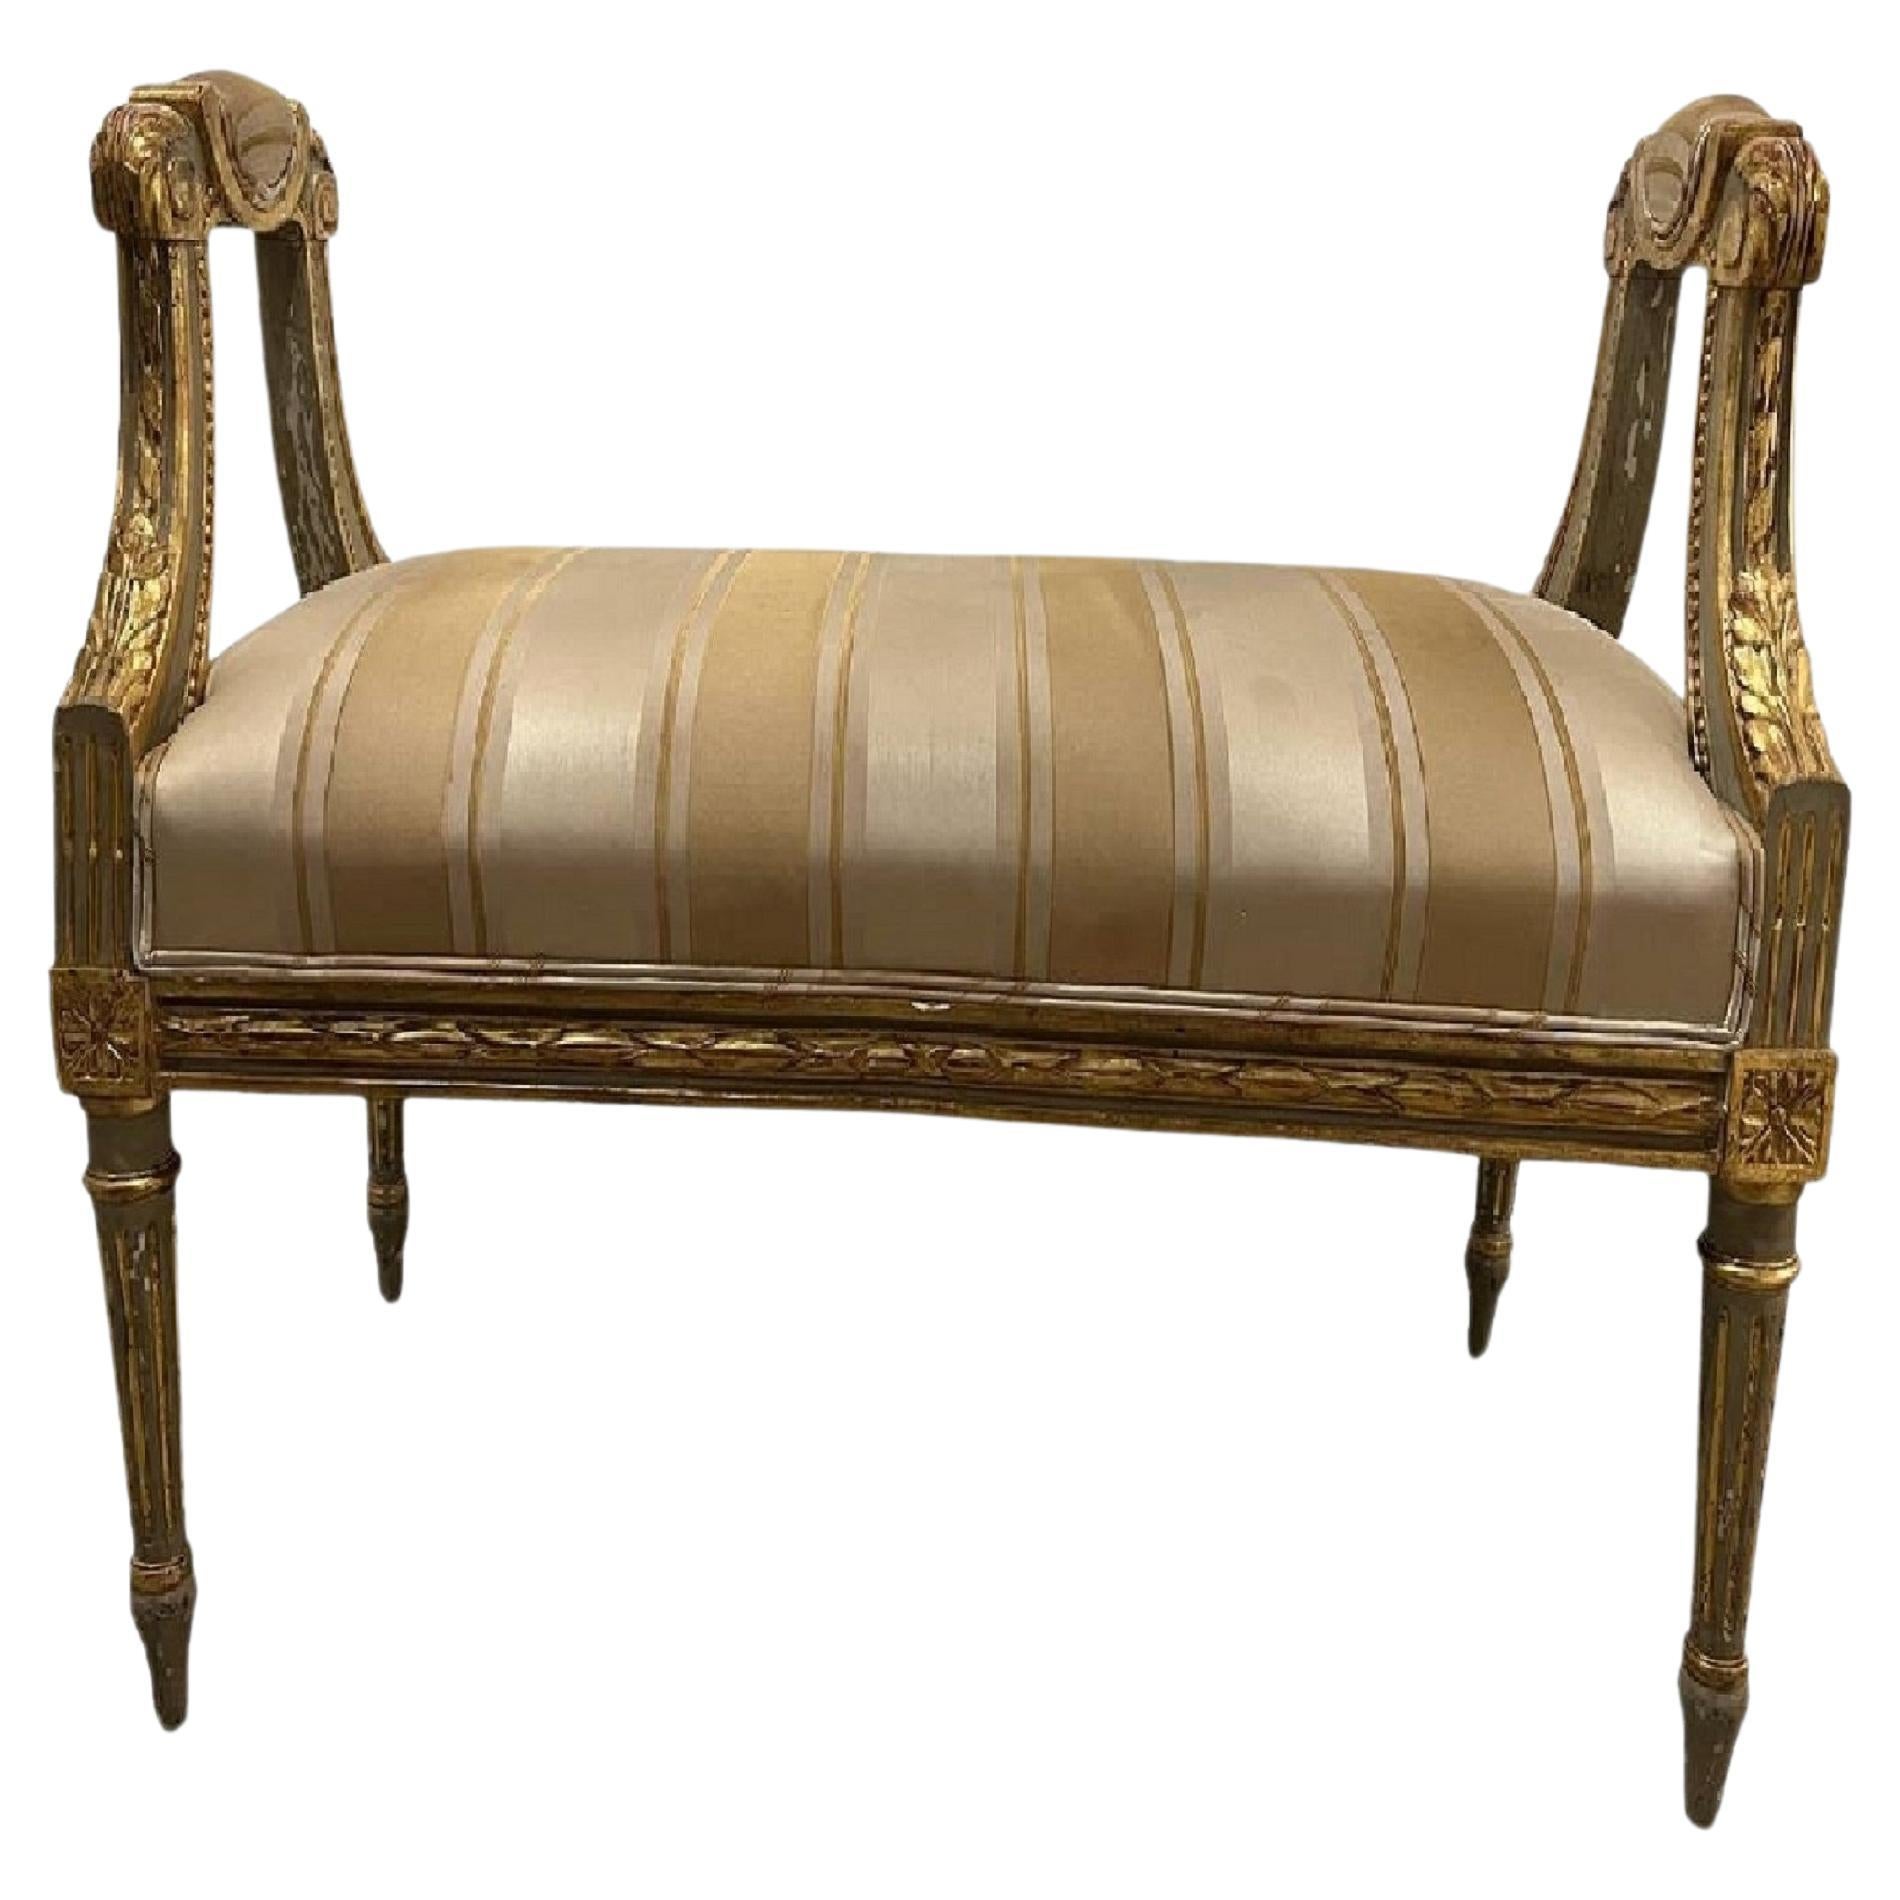 Late 19th Century French Gilt Wood Bench For Sale